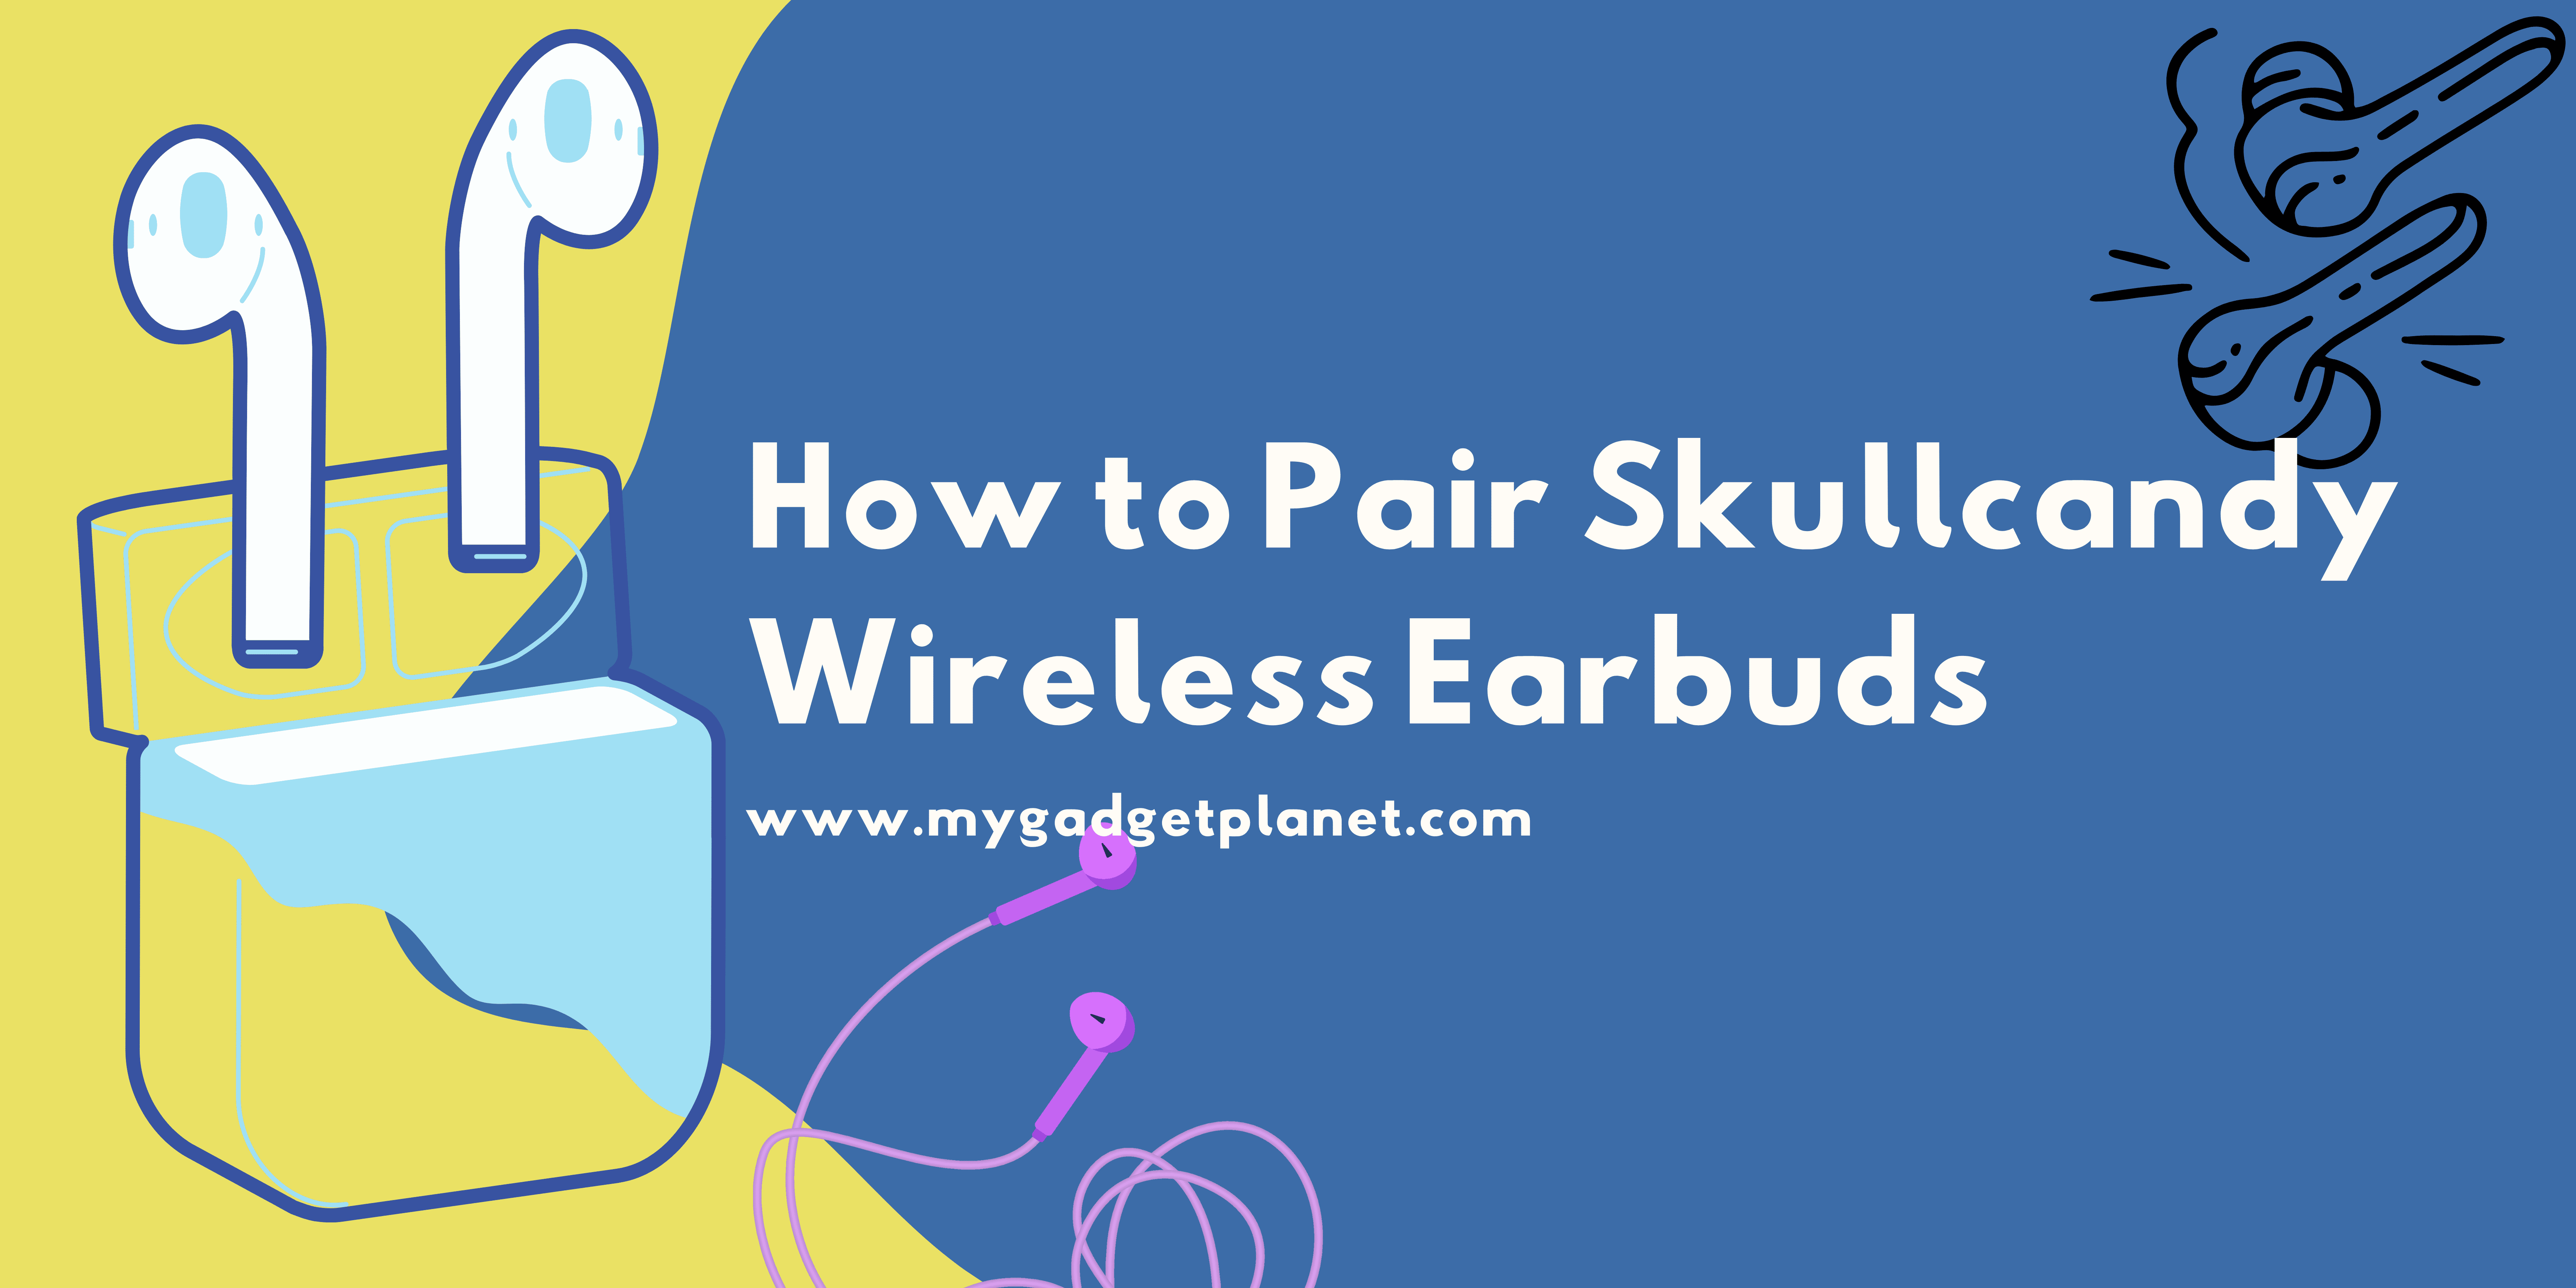 A Complete Guide: How to Pair Skullcandy Wireless Earbuds